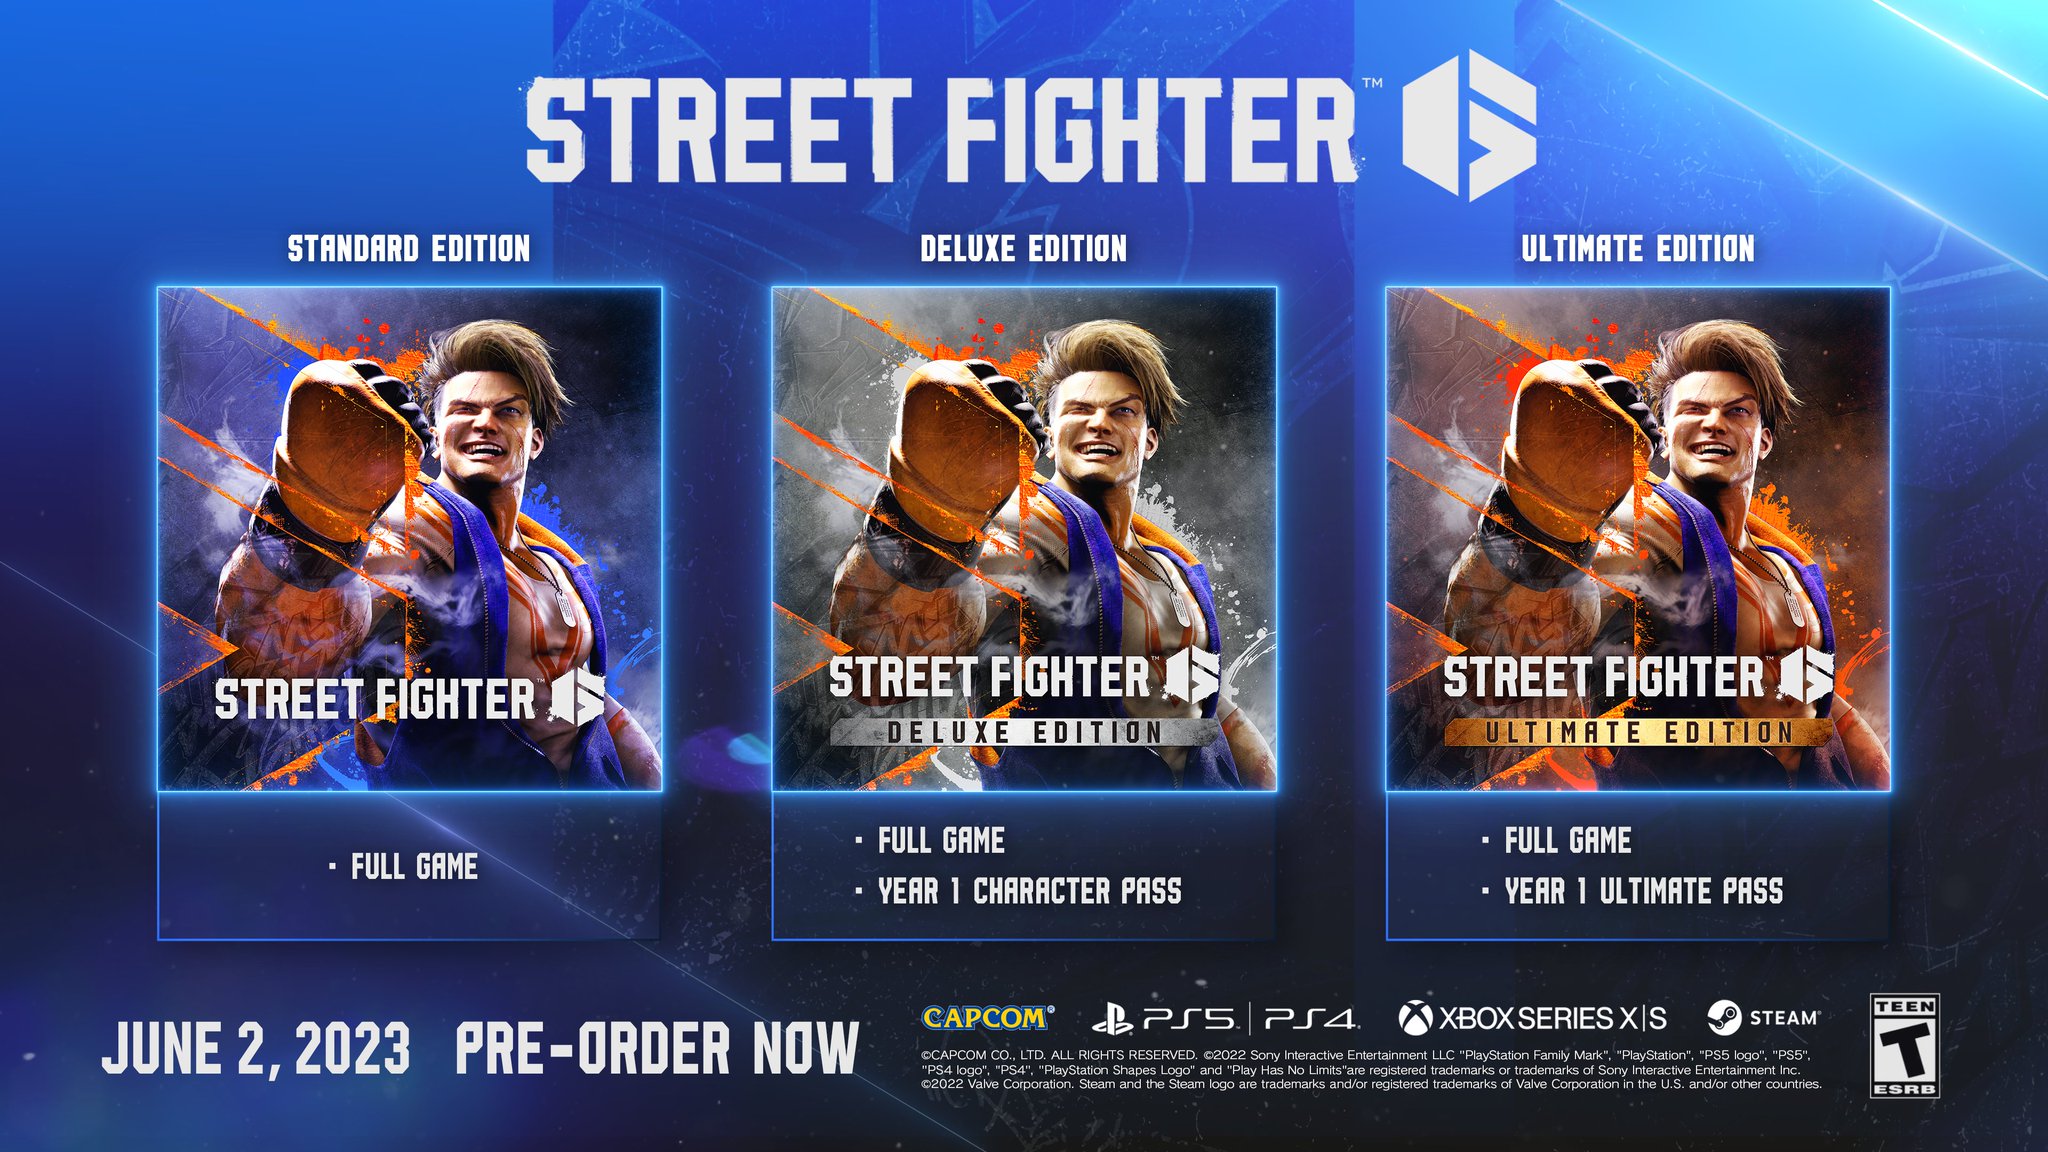 Street Fighter 6 — Year 1 Character Pass on PS5 — price history,  screenshots, discounts • USA